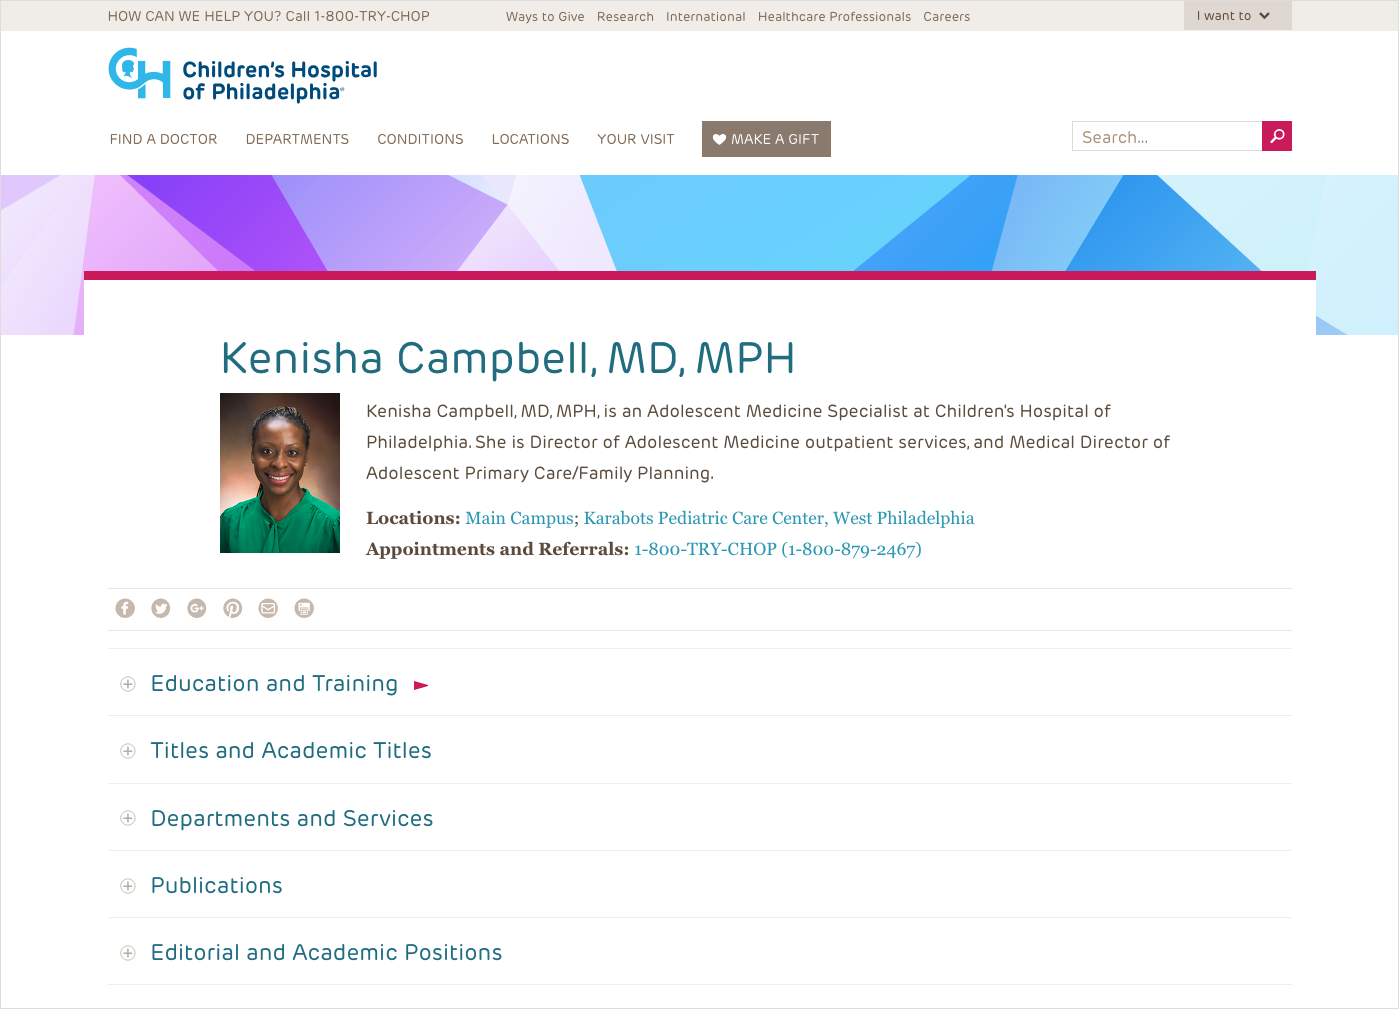 The Children’s Hospital of Philadelphia presents secondary biographic information about its doctors using a simple, expandable accordion-style menu as part of its page design.